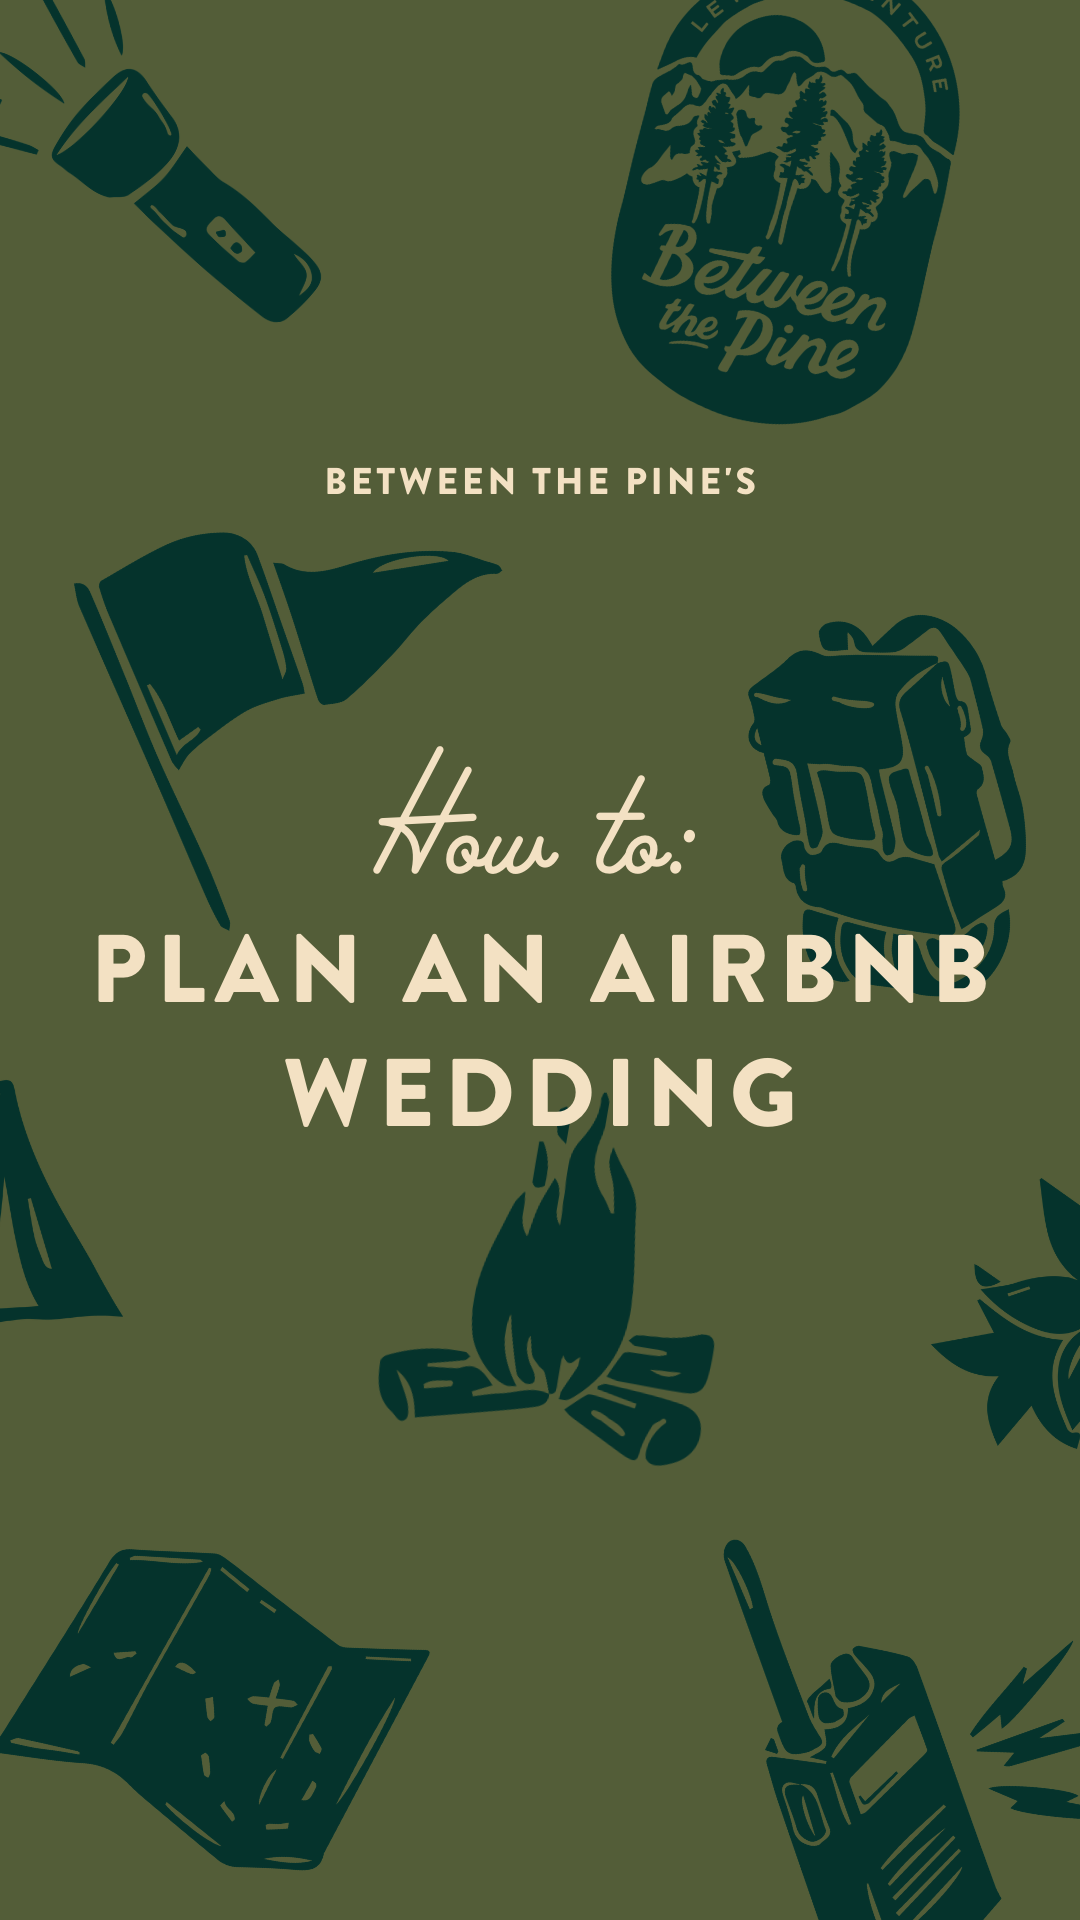 How to plan an airbnb wedding.png